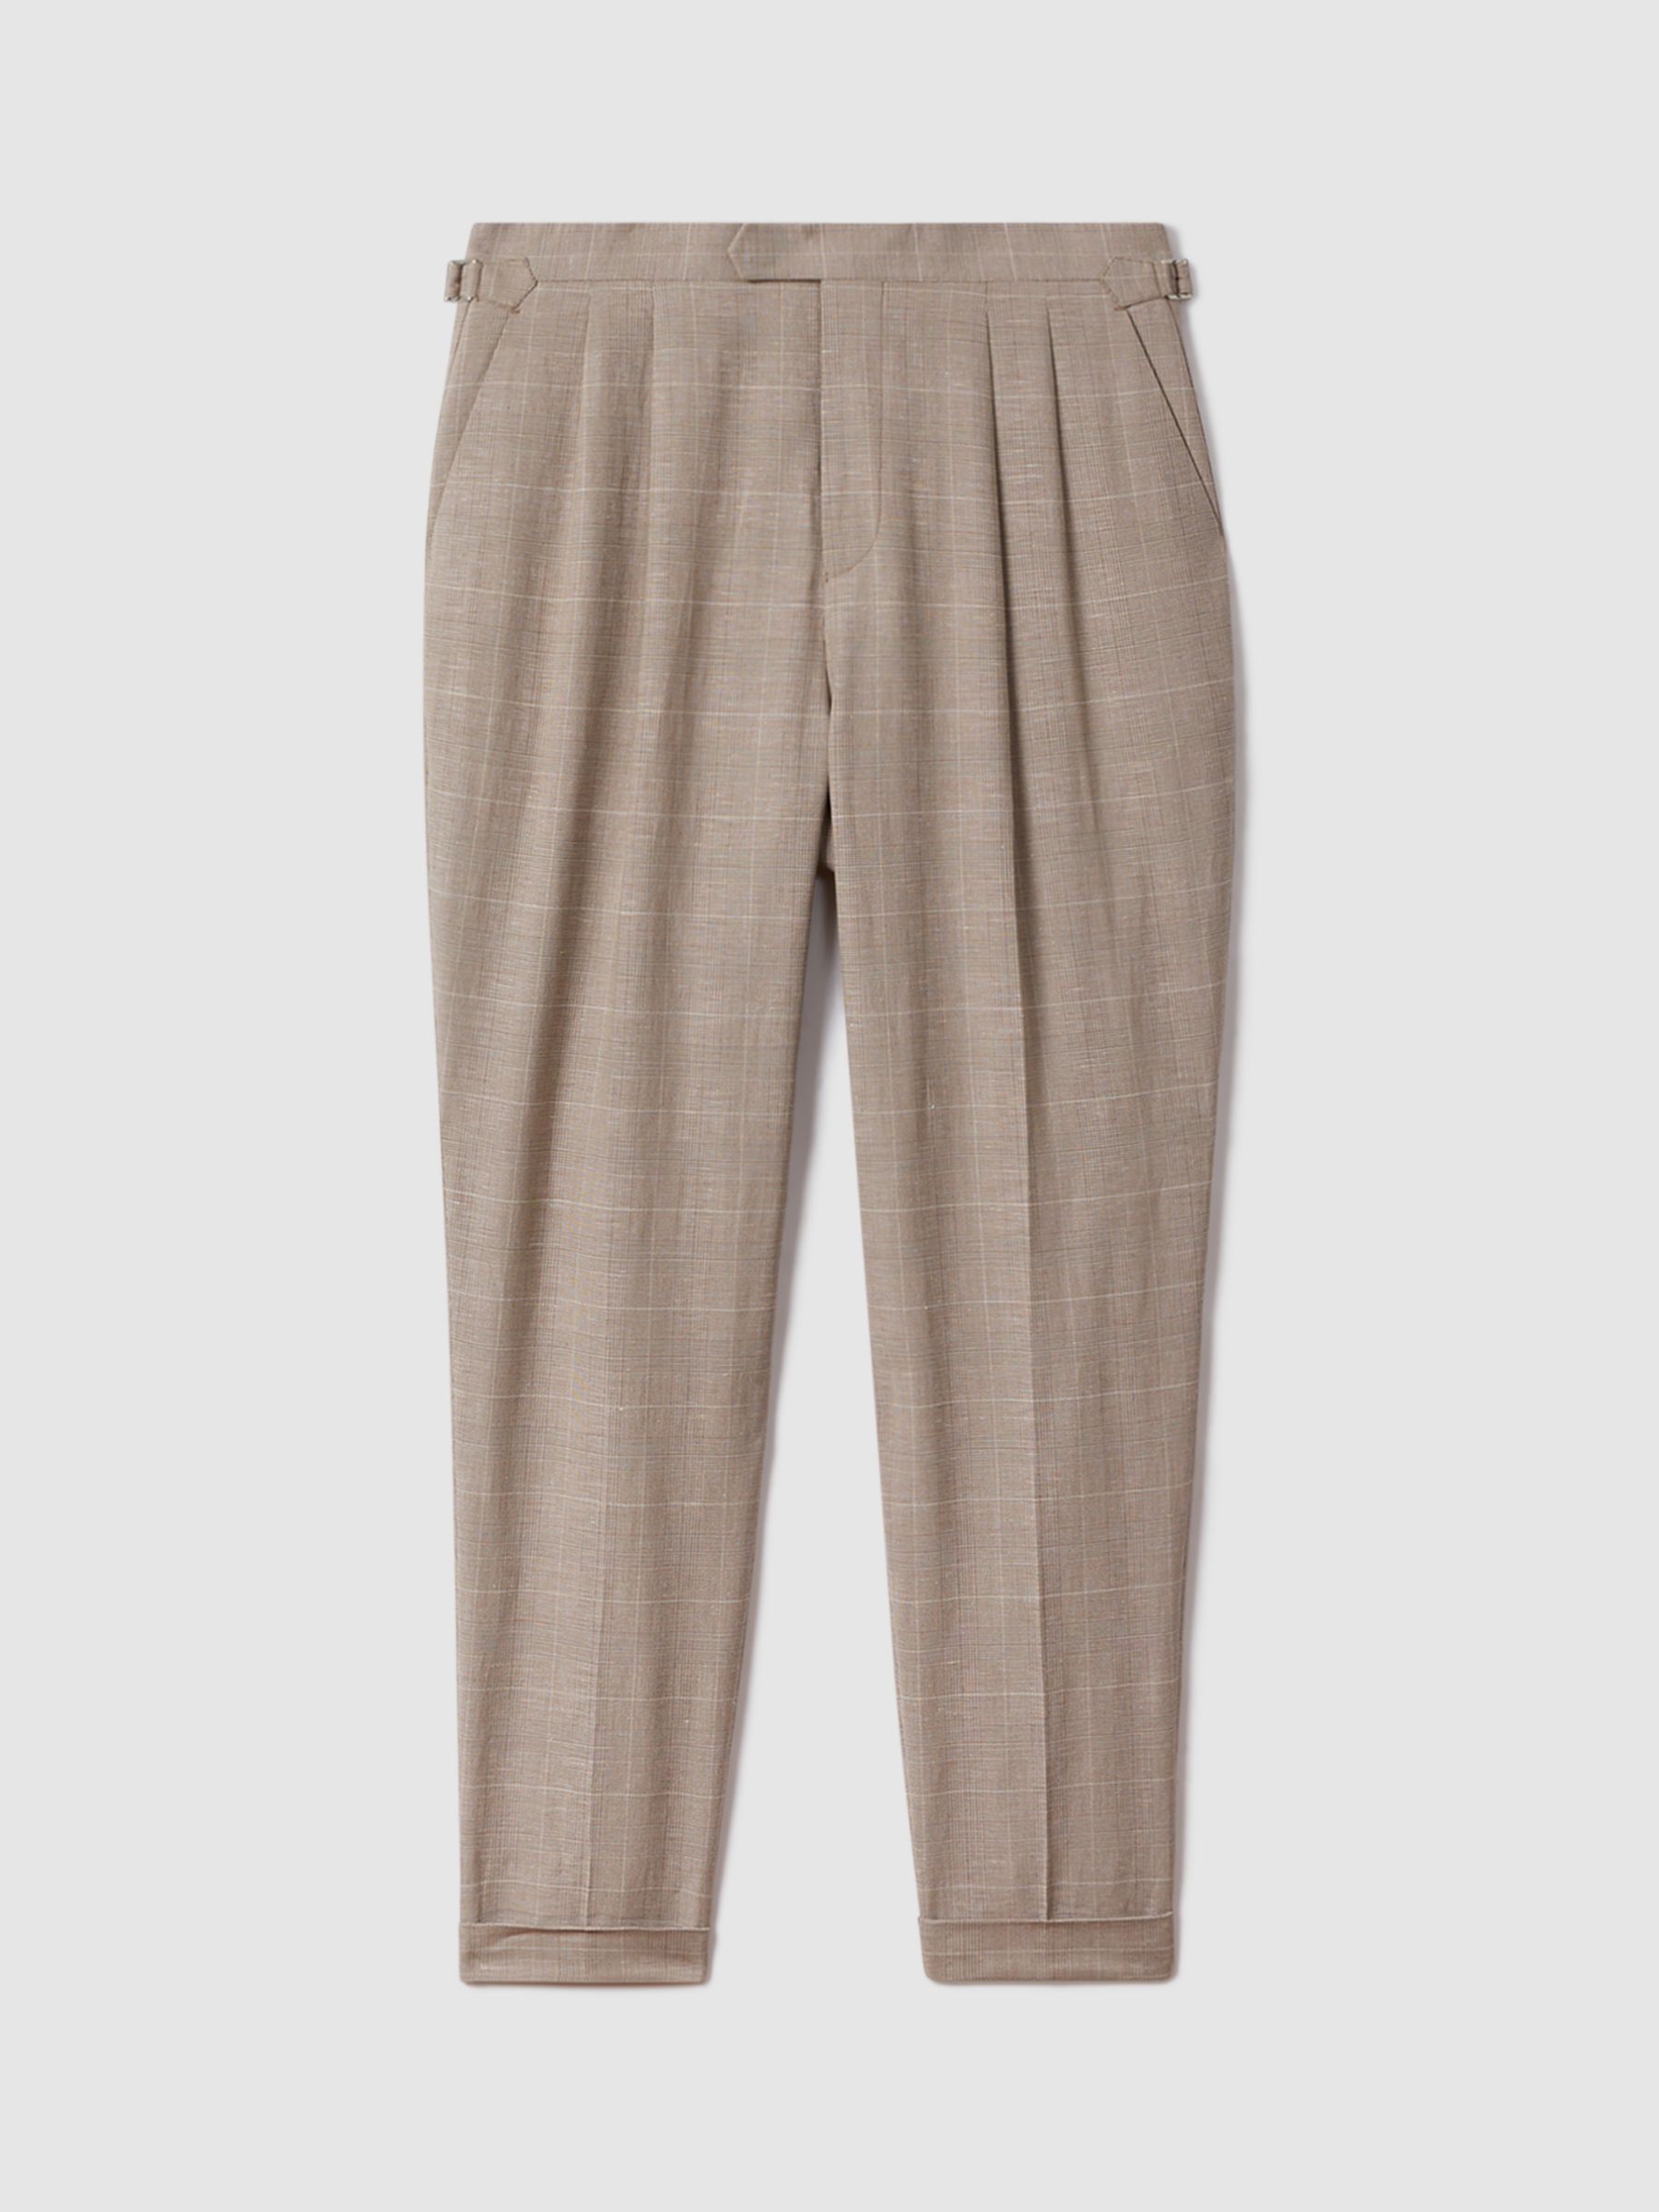 Reiss Collect Hopsack Check Trousers, Oatmeal, 28R